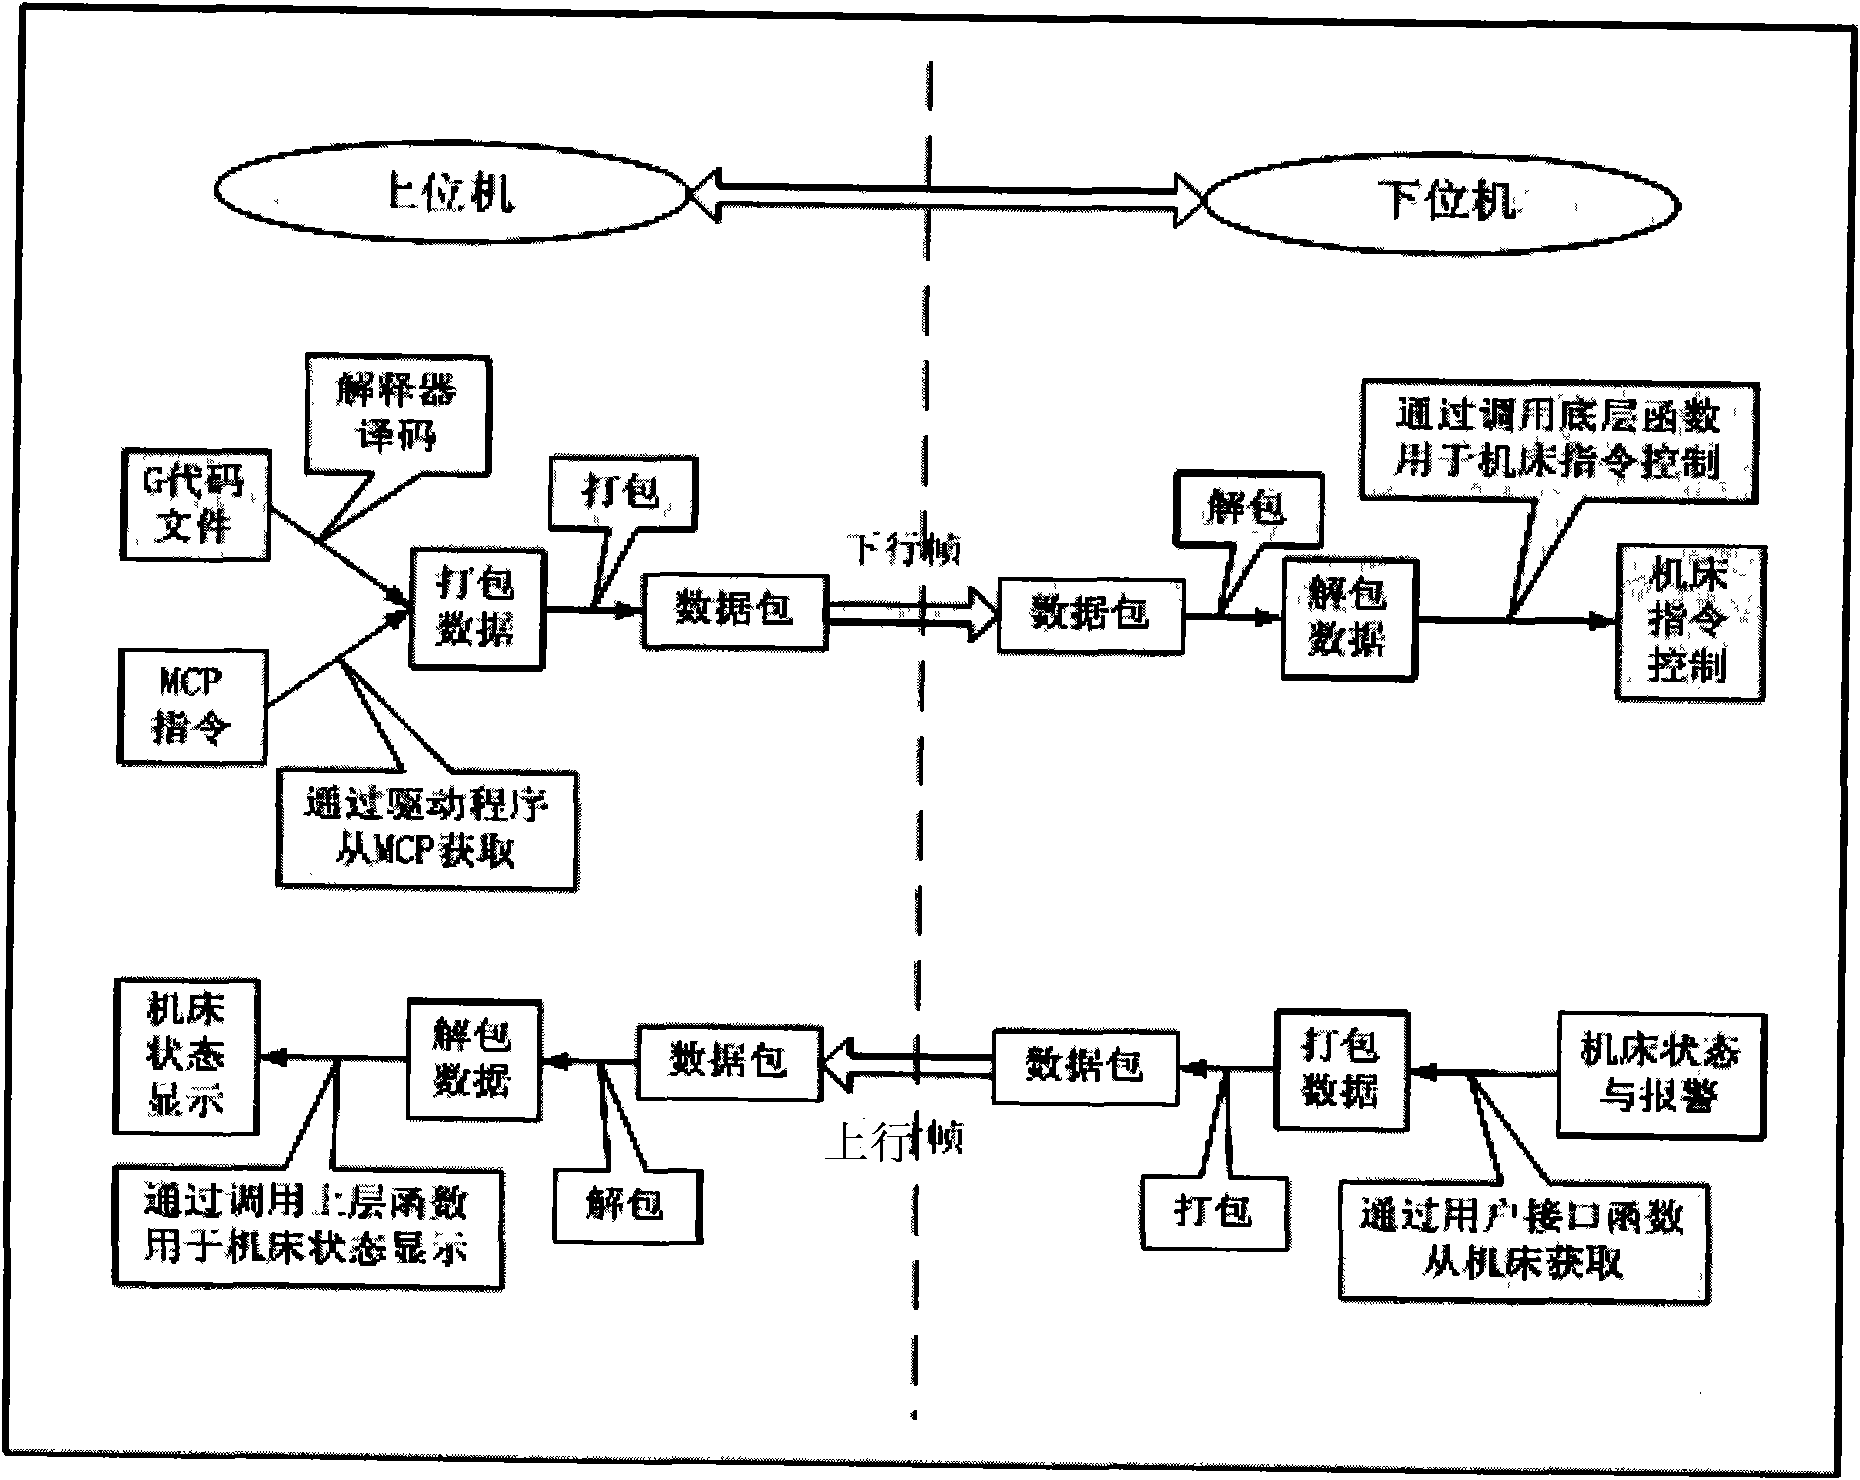 Network connection based teaching equipment adopting multiple numerical control systems and communication method